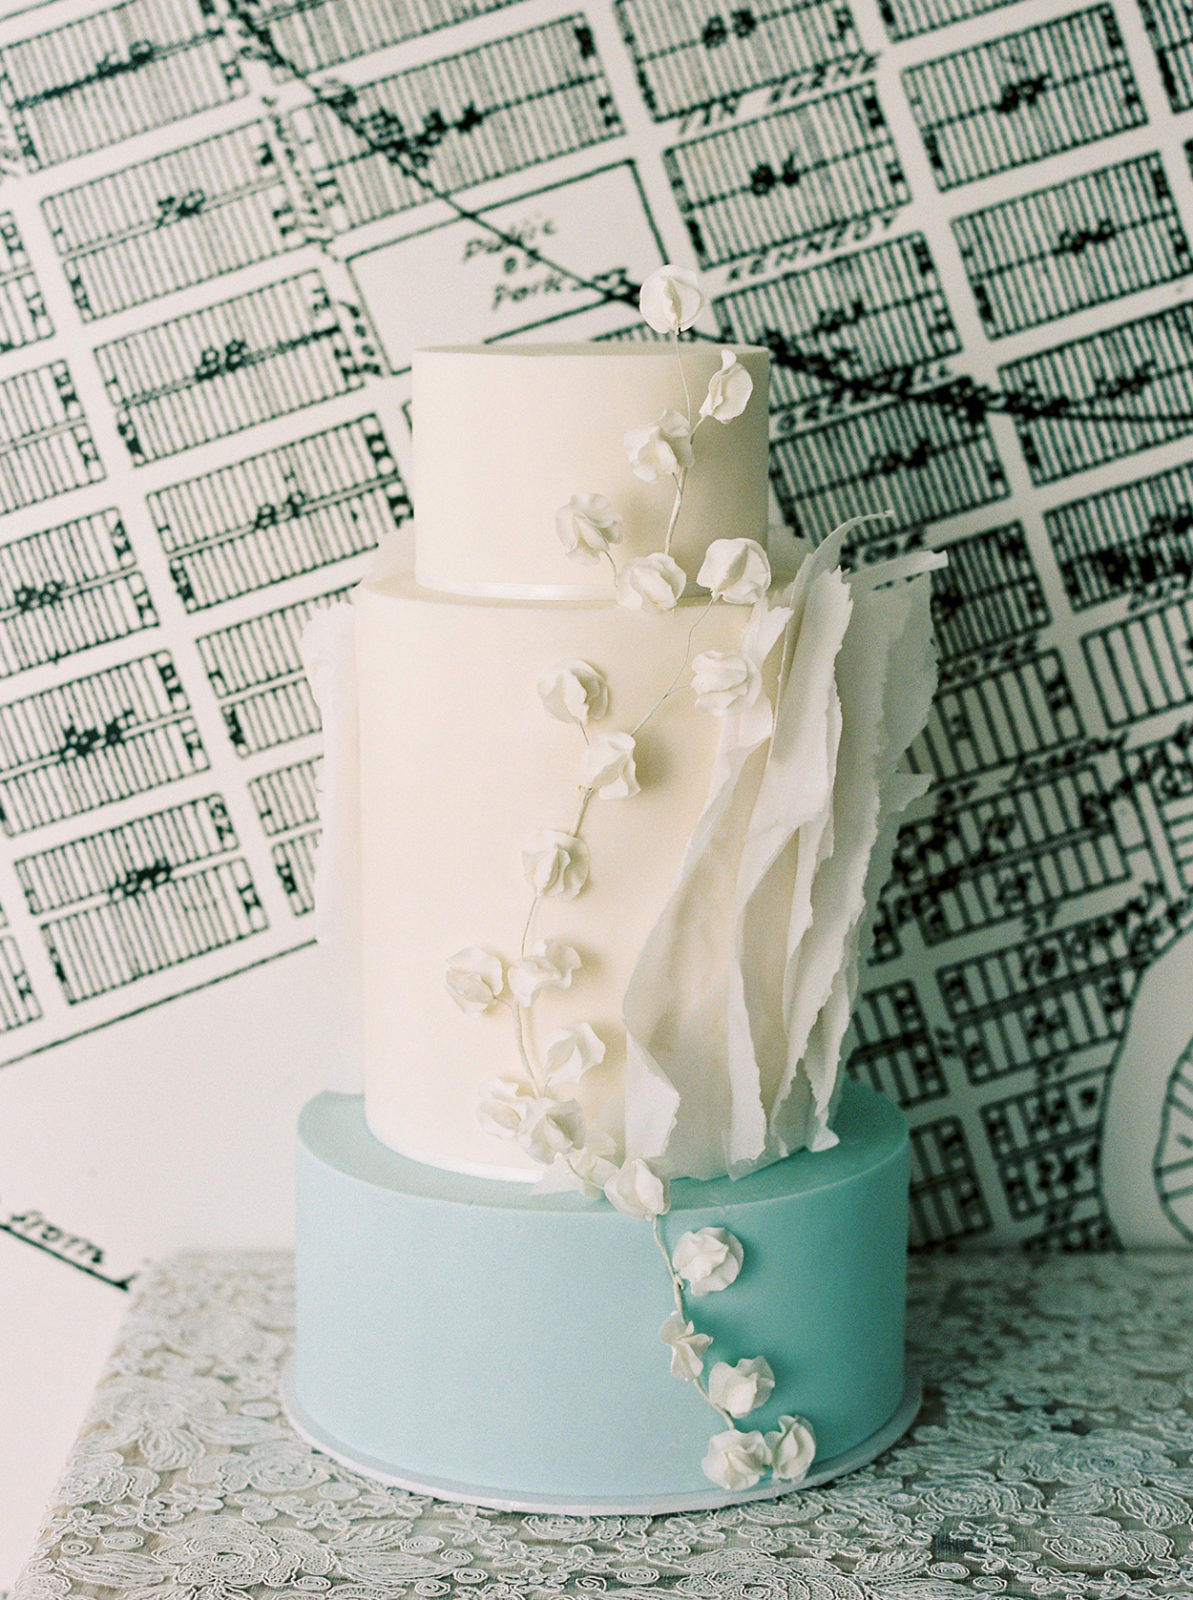 Show-stopping blue and white wedding cake with floral details